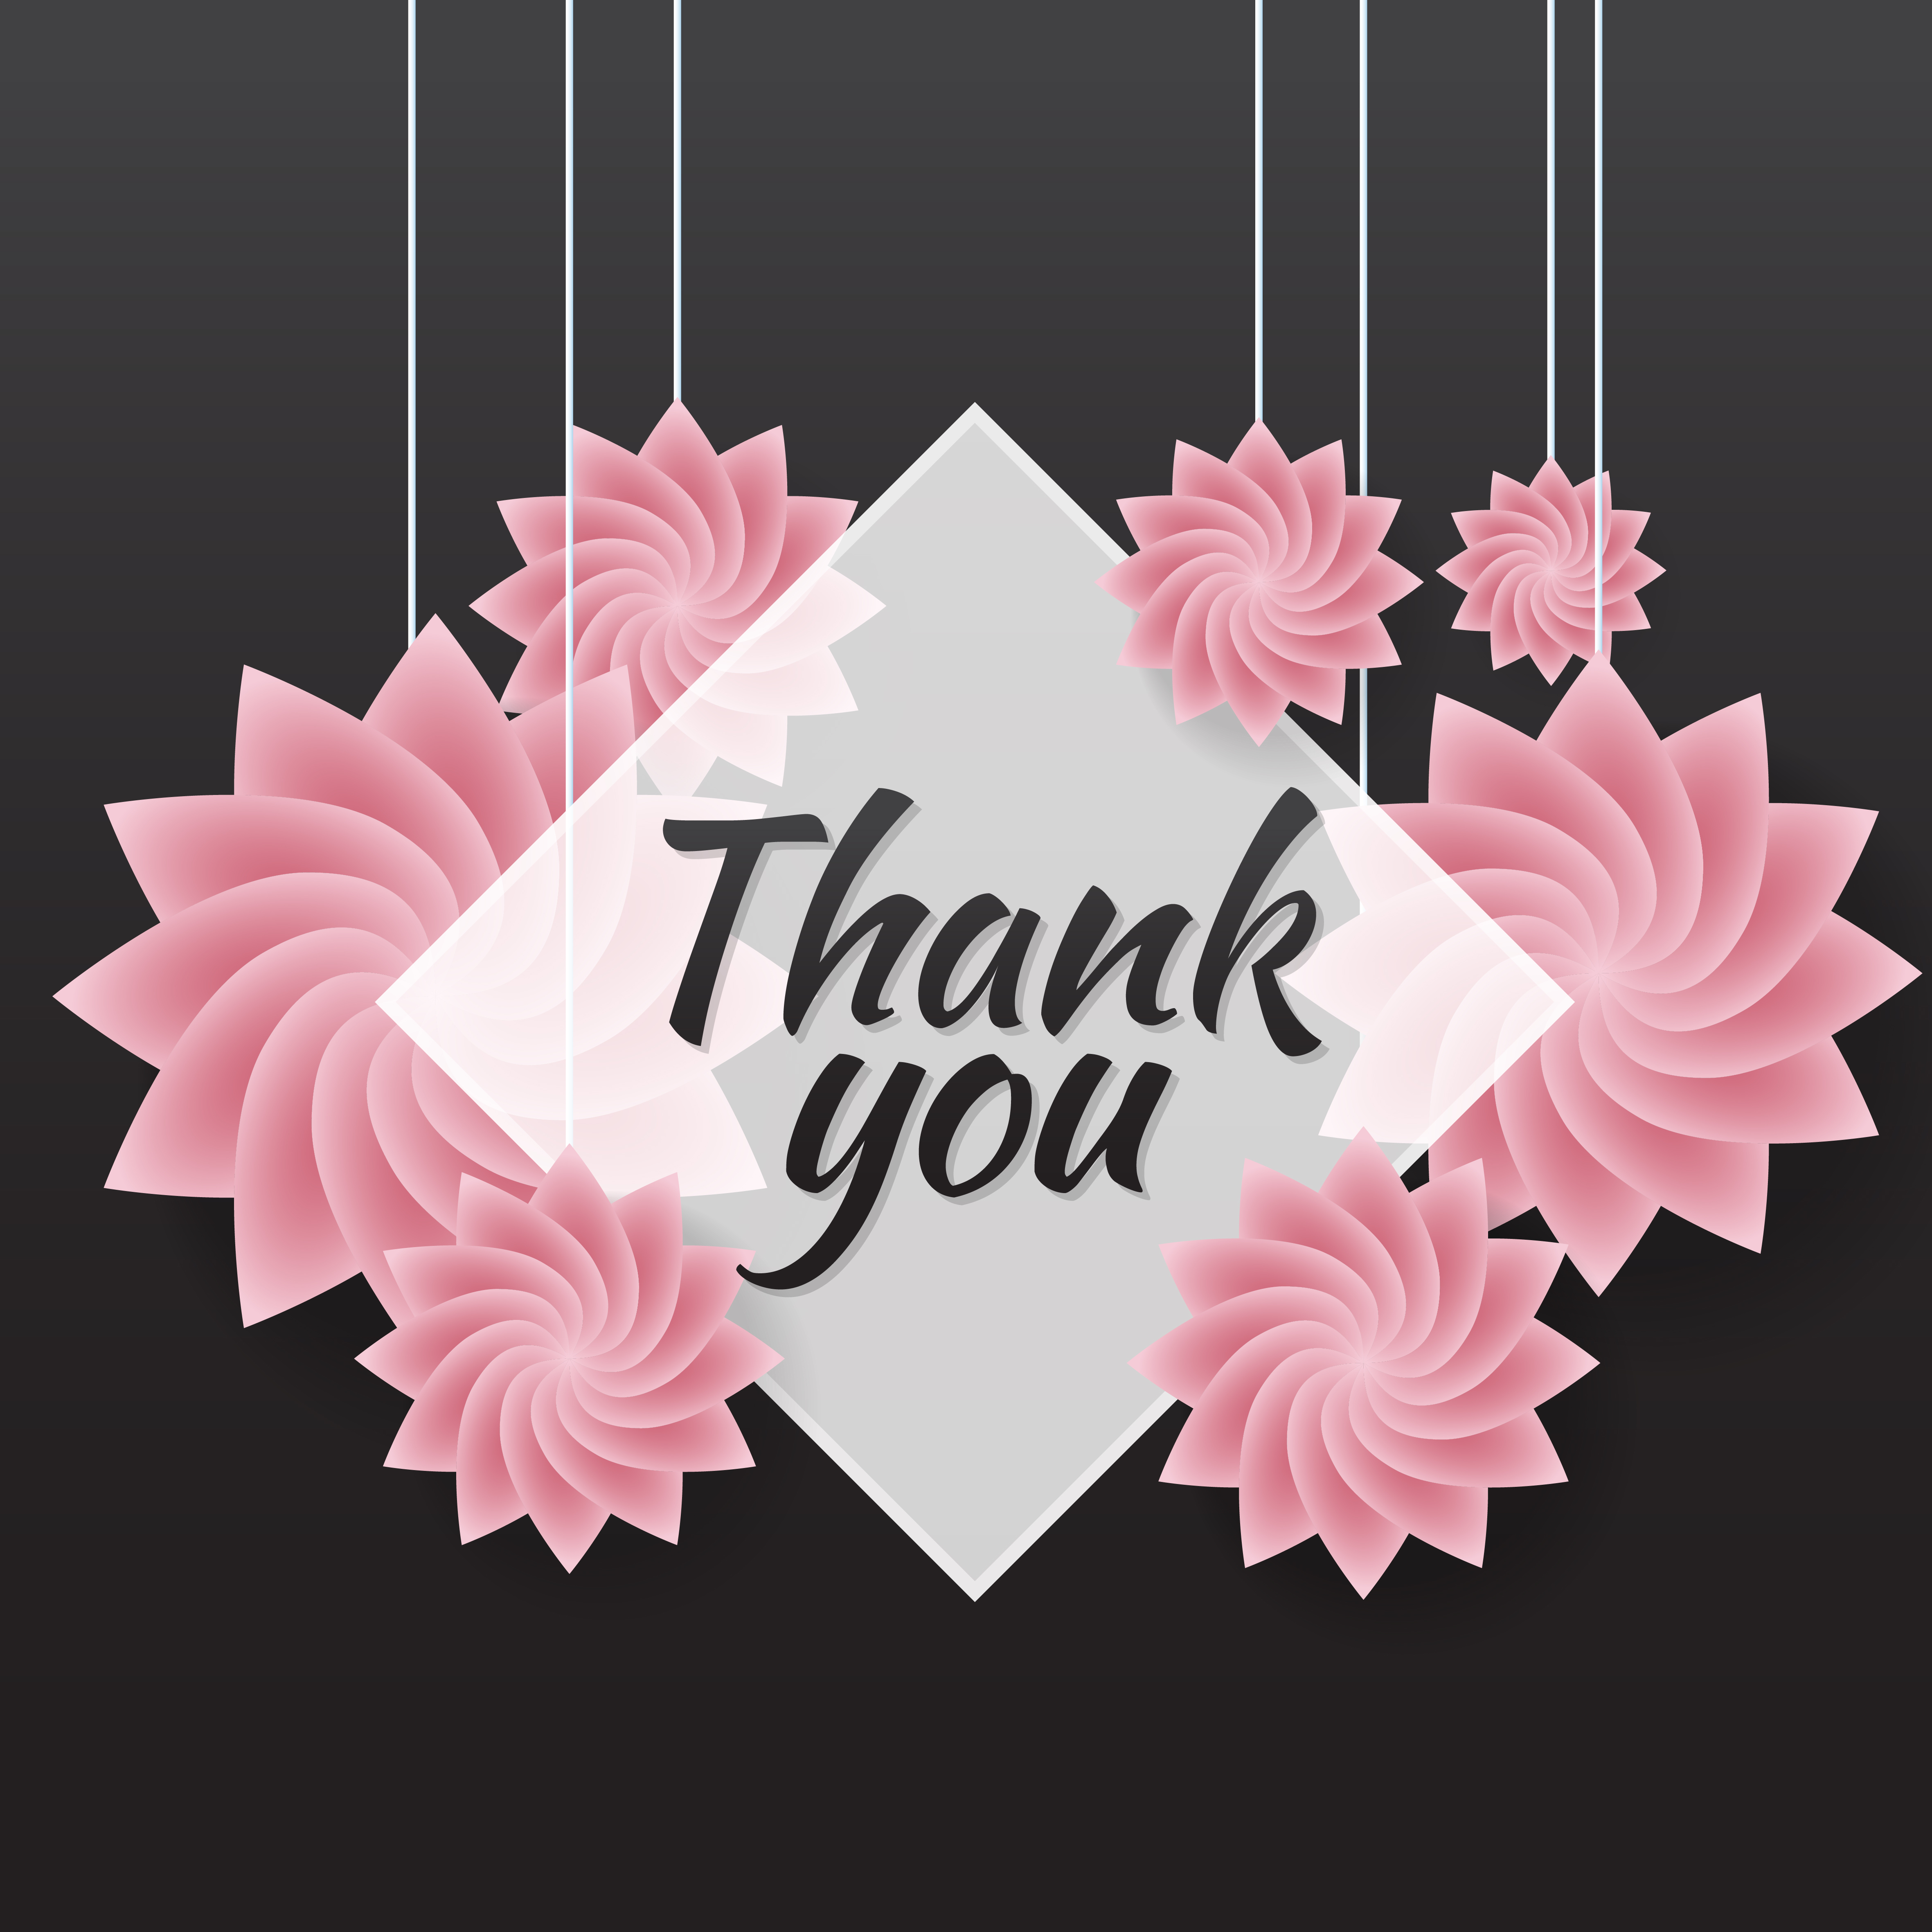 Thank You Background Free For PowerPoint Backgrounds - SlideBackground